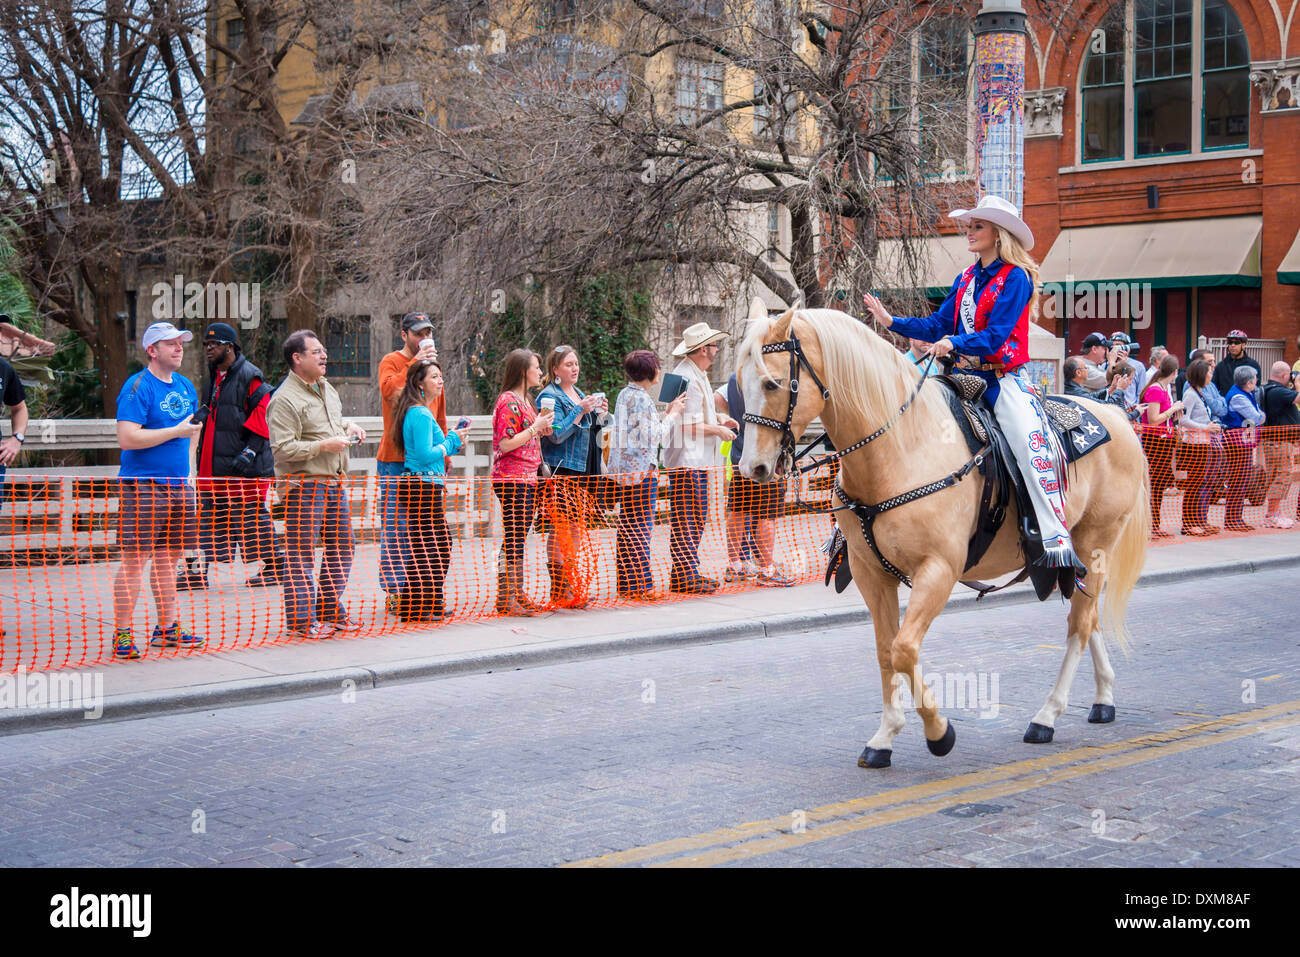 USA, Texas, San Antonio, Grand opening parade of the 2014 Rodeo, Miss Rodeo 2013 Stock Photo